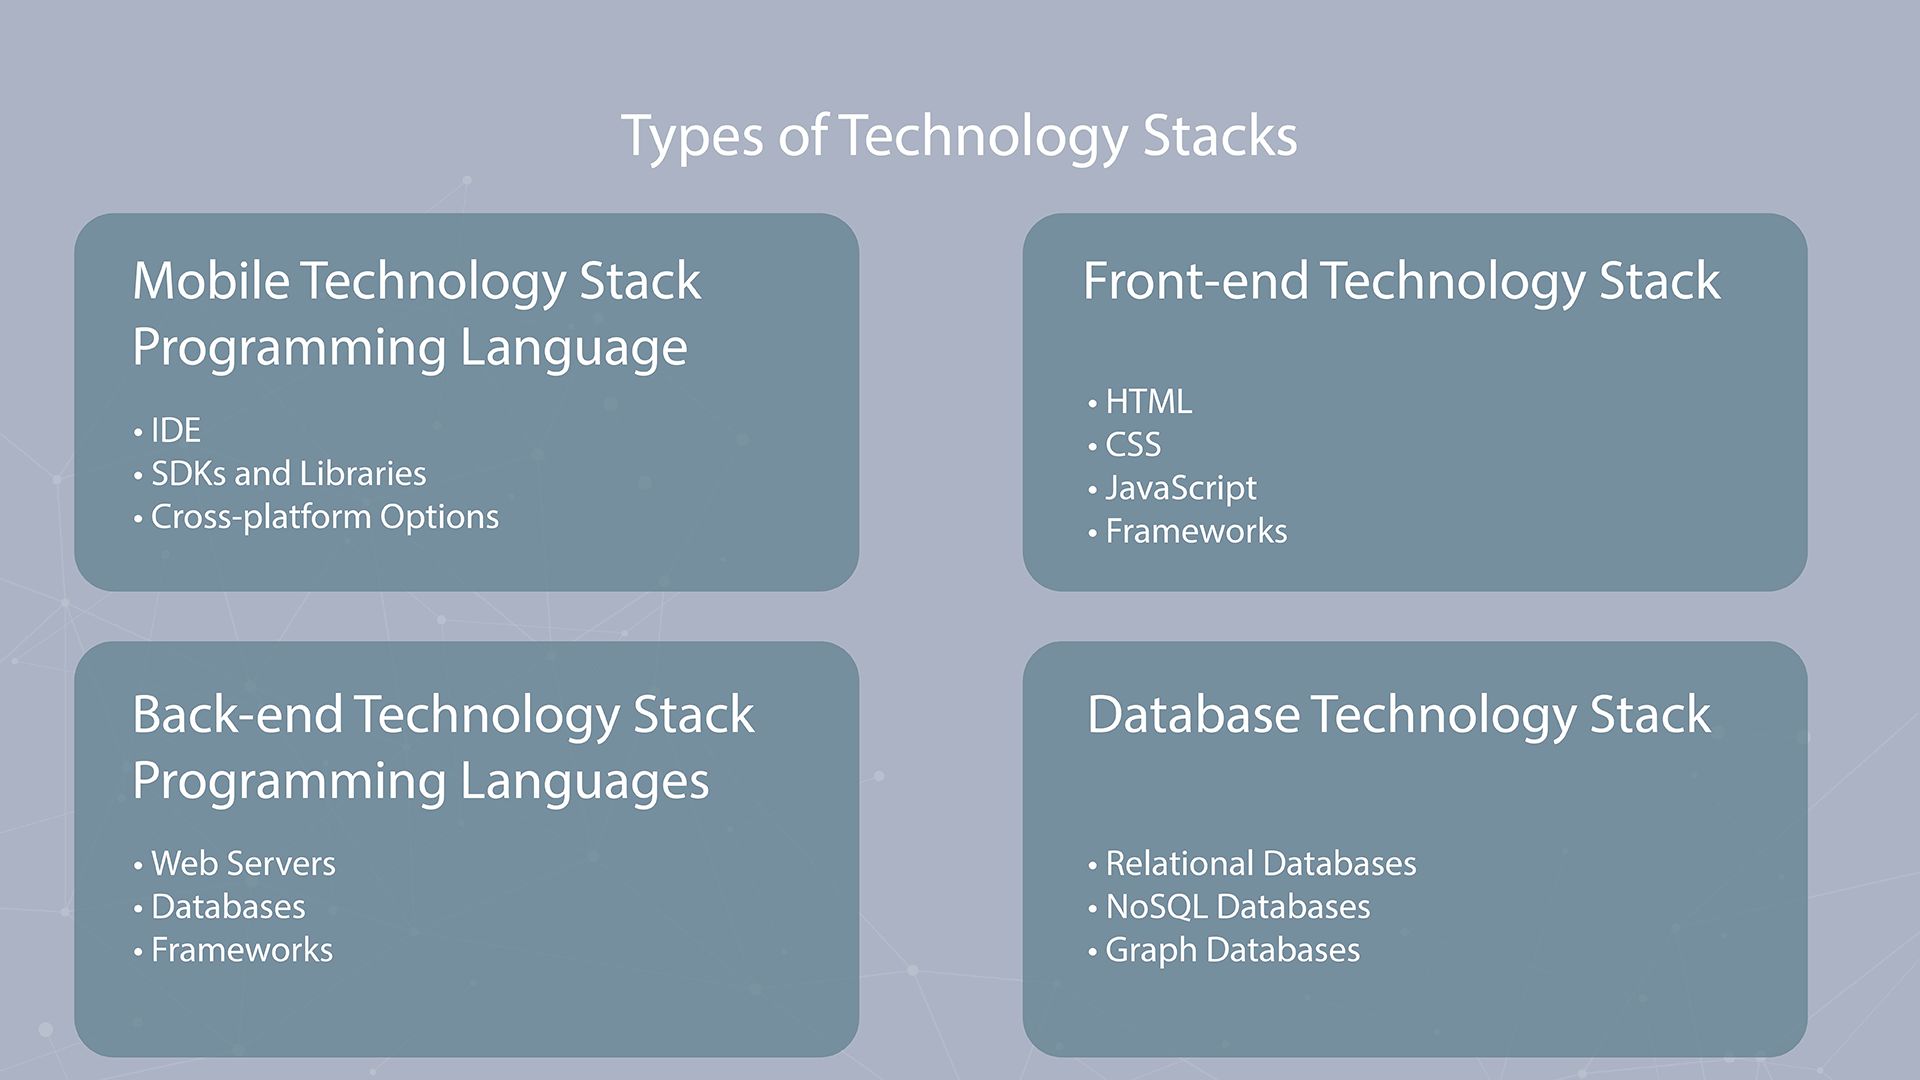 Types of Technology Stacks